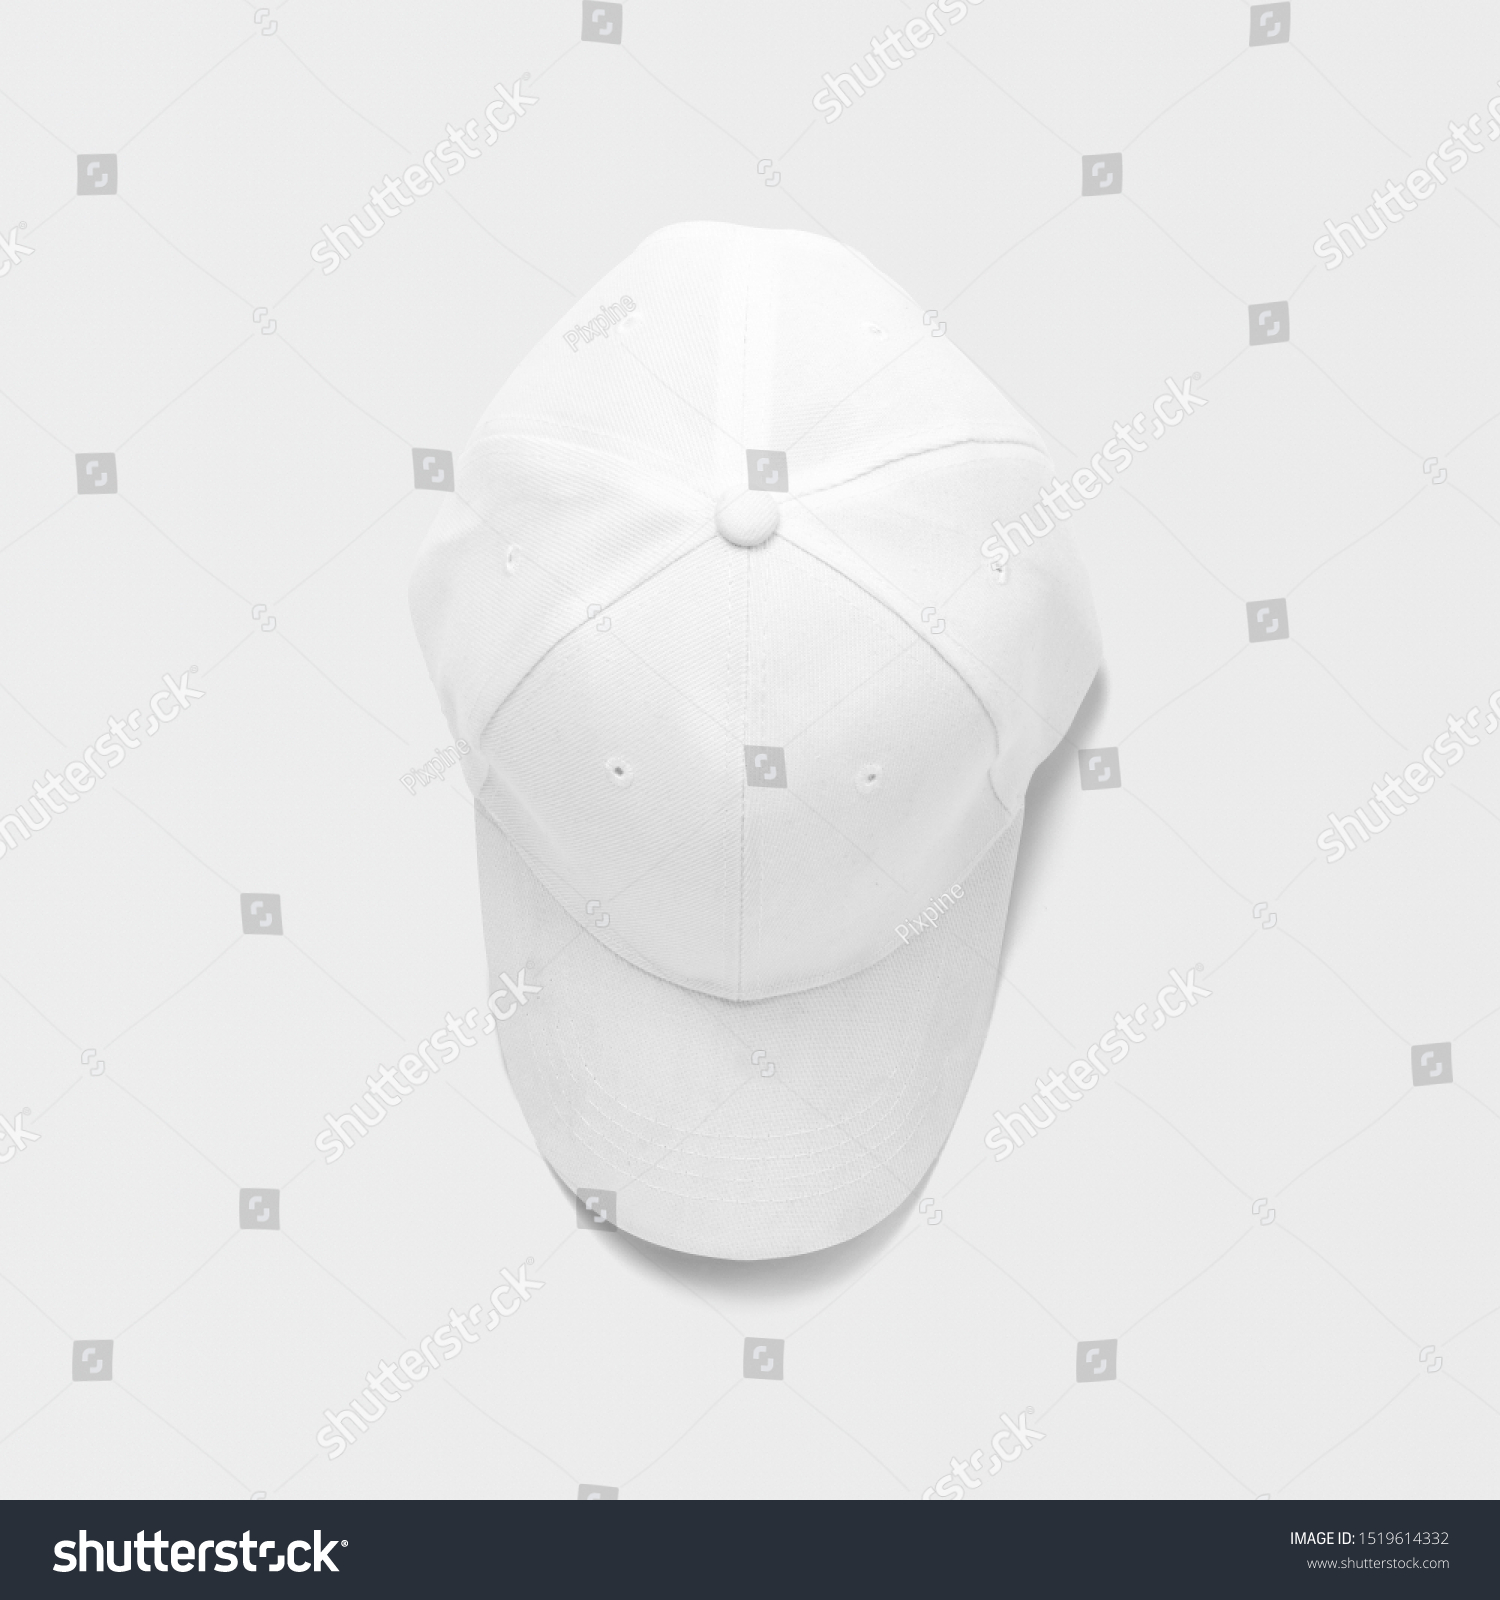 Top view of white plain baseball cap on isolated background. #1519614332